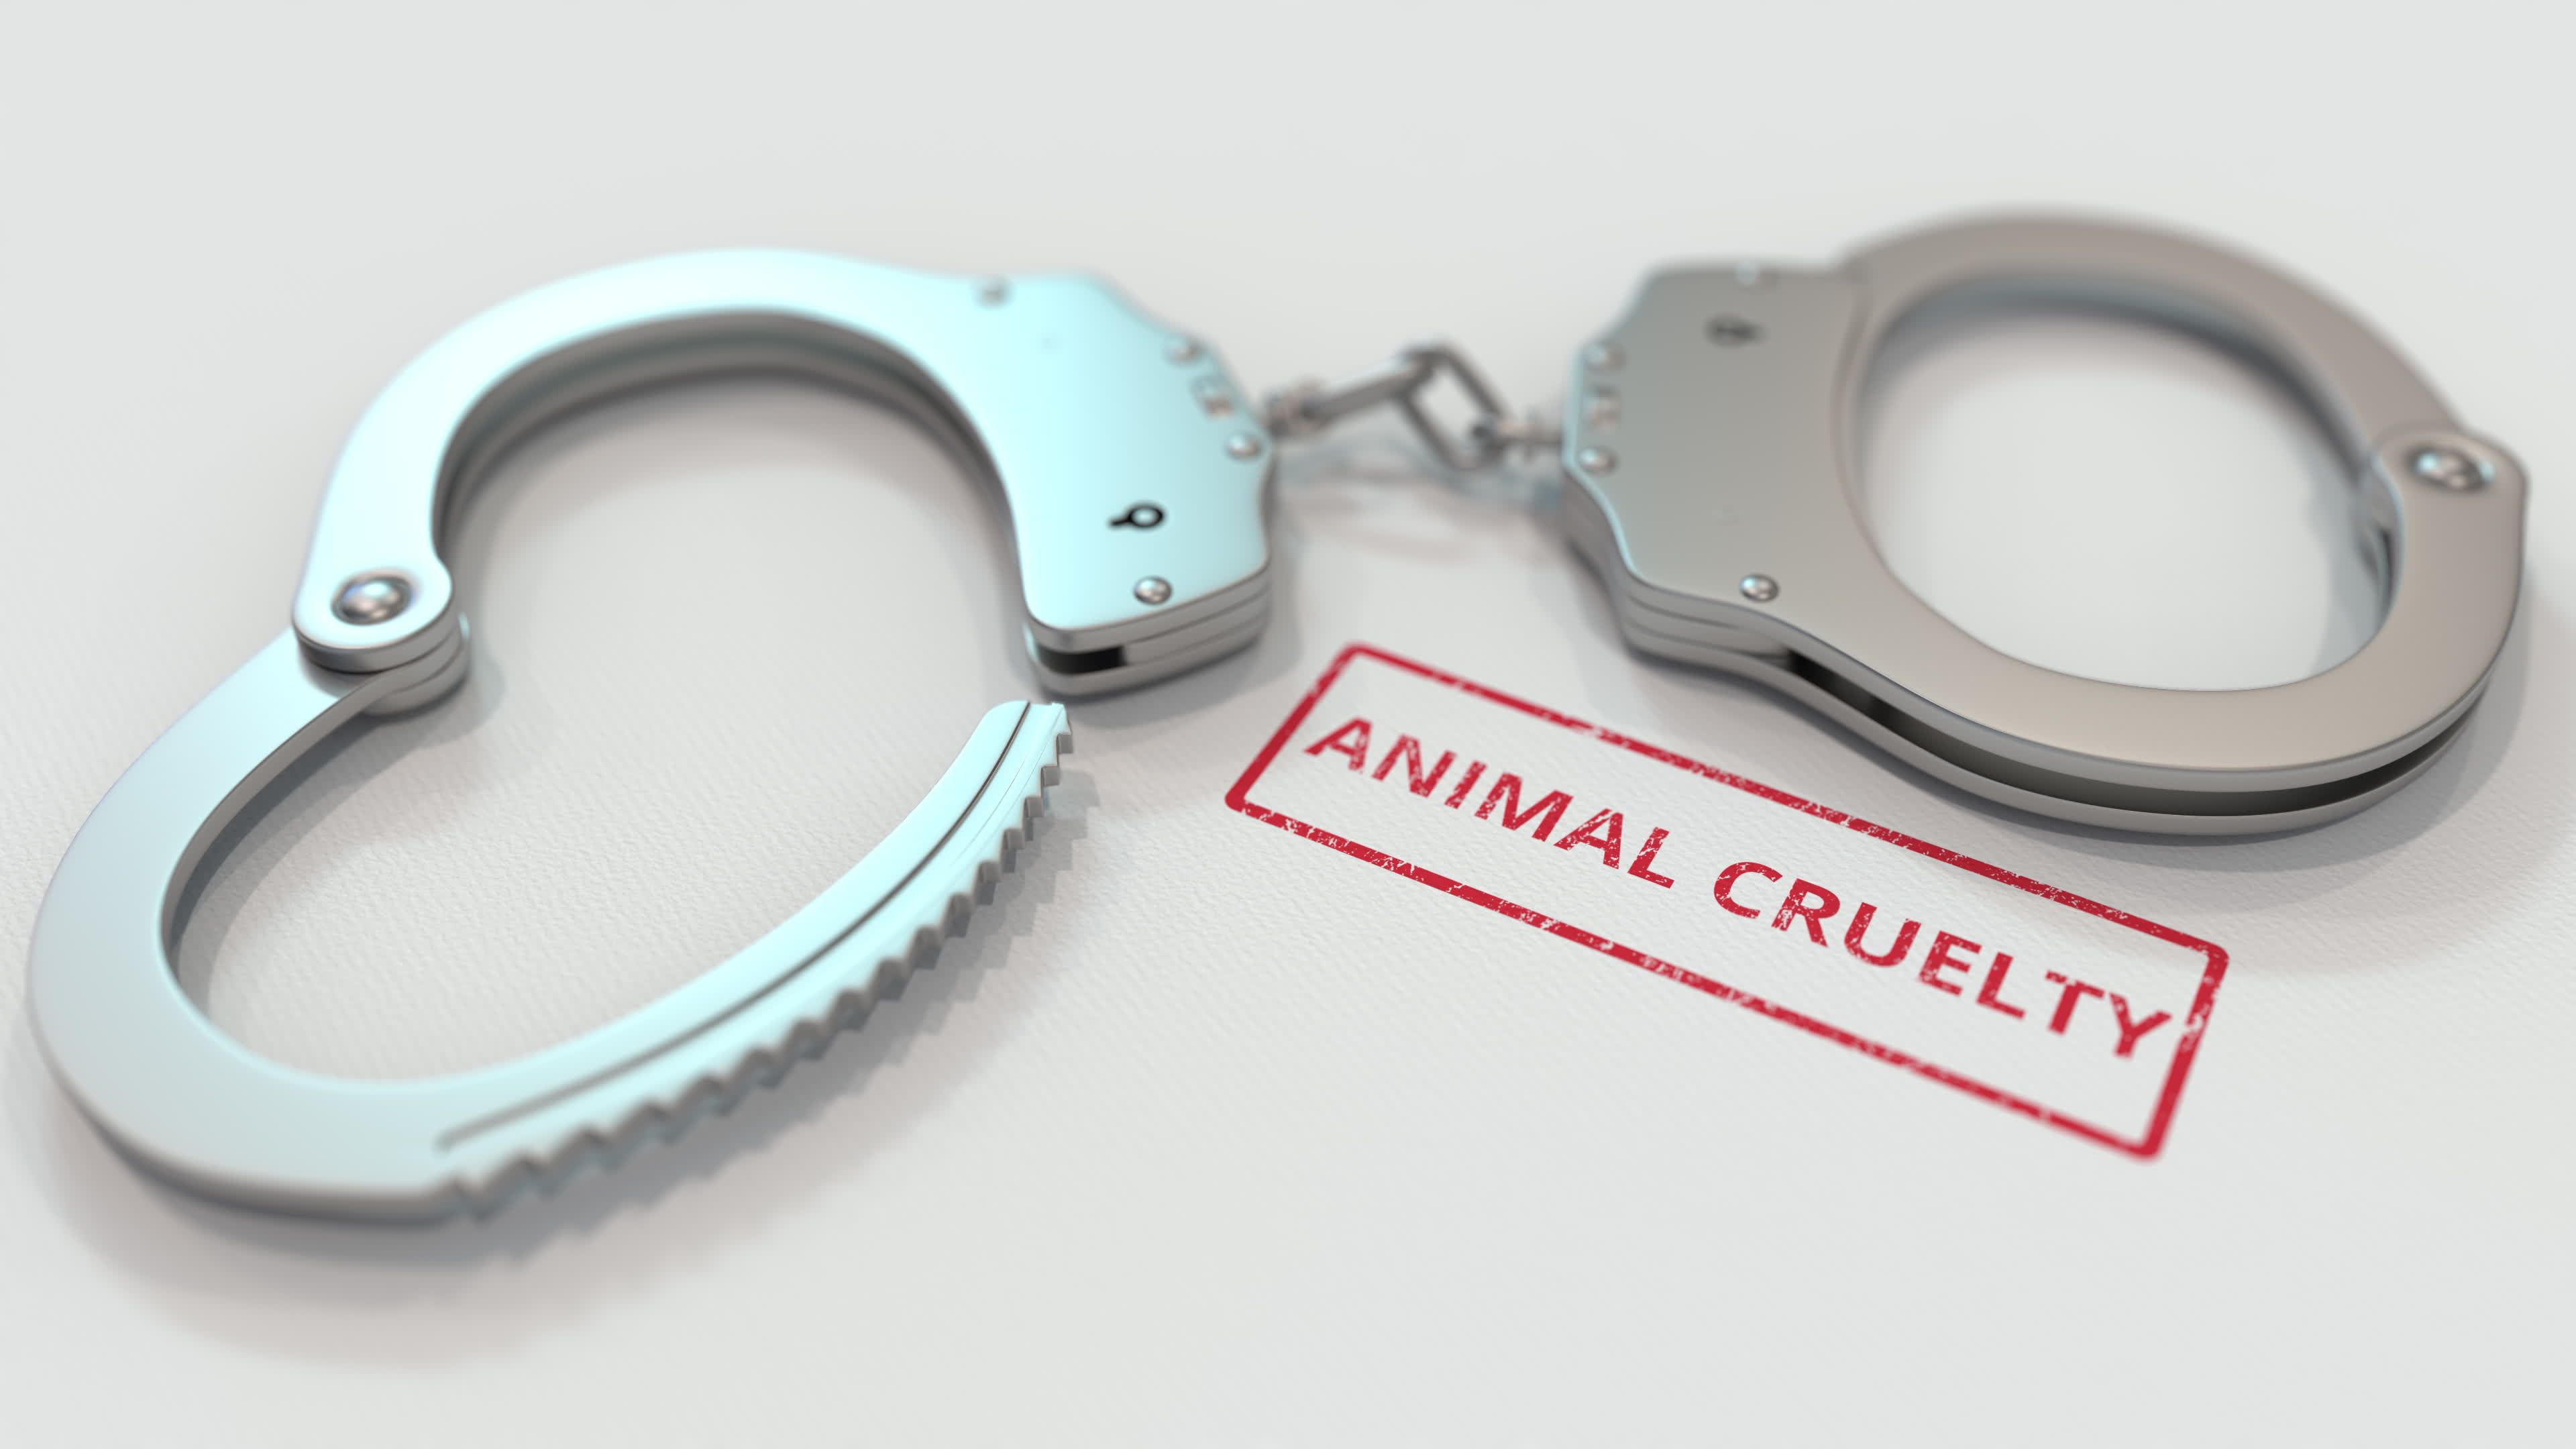 ANIMAL CRUELTY stamp and handcuffs. Crime and punishment related conceptual 3D rendering